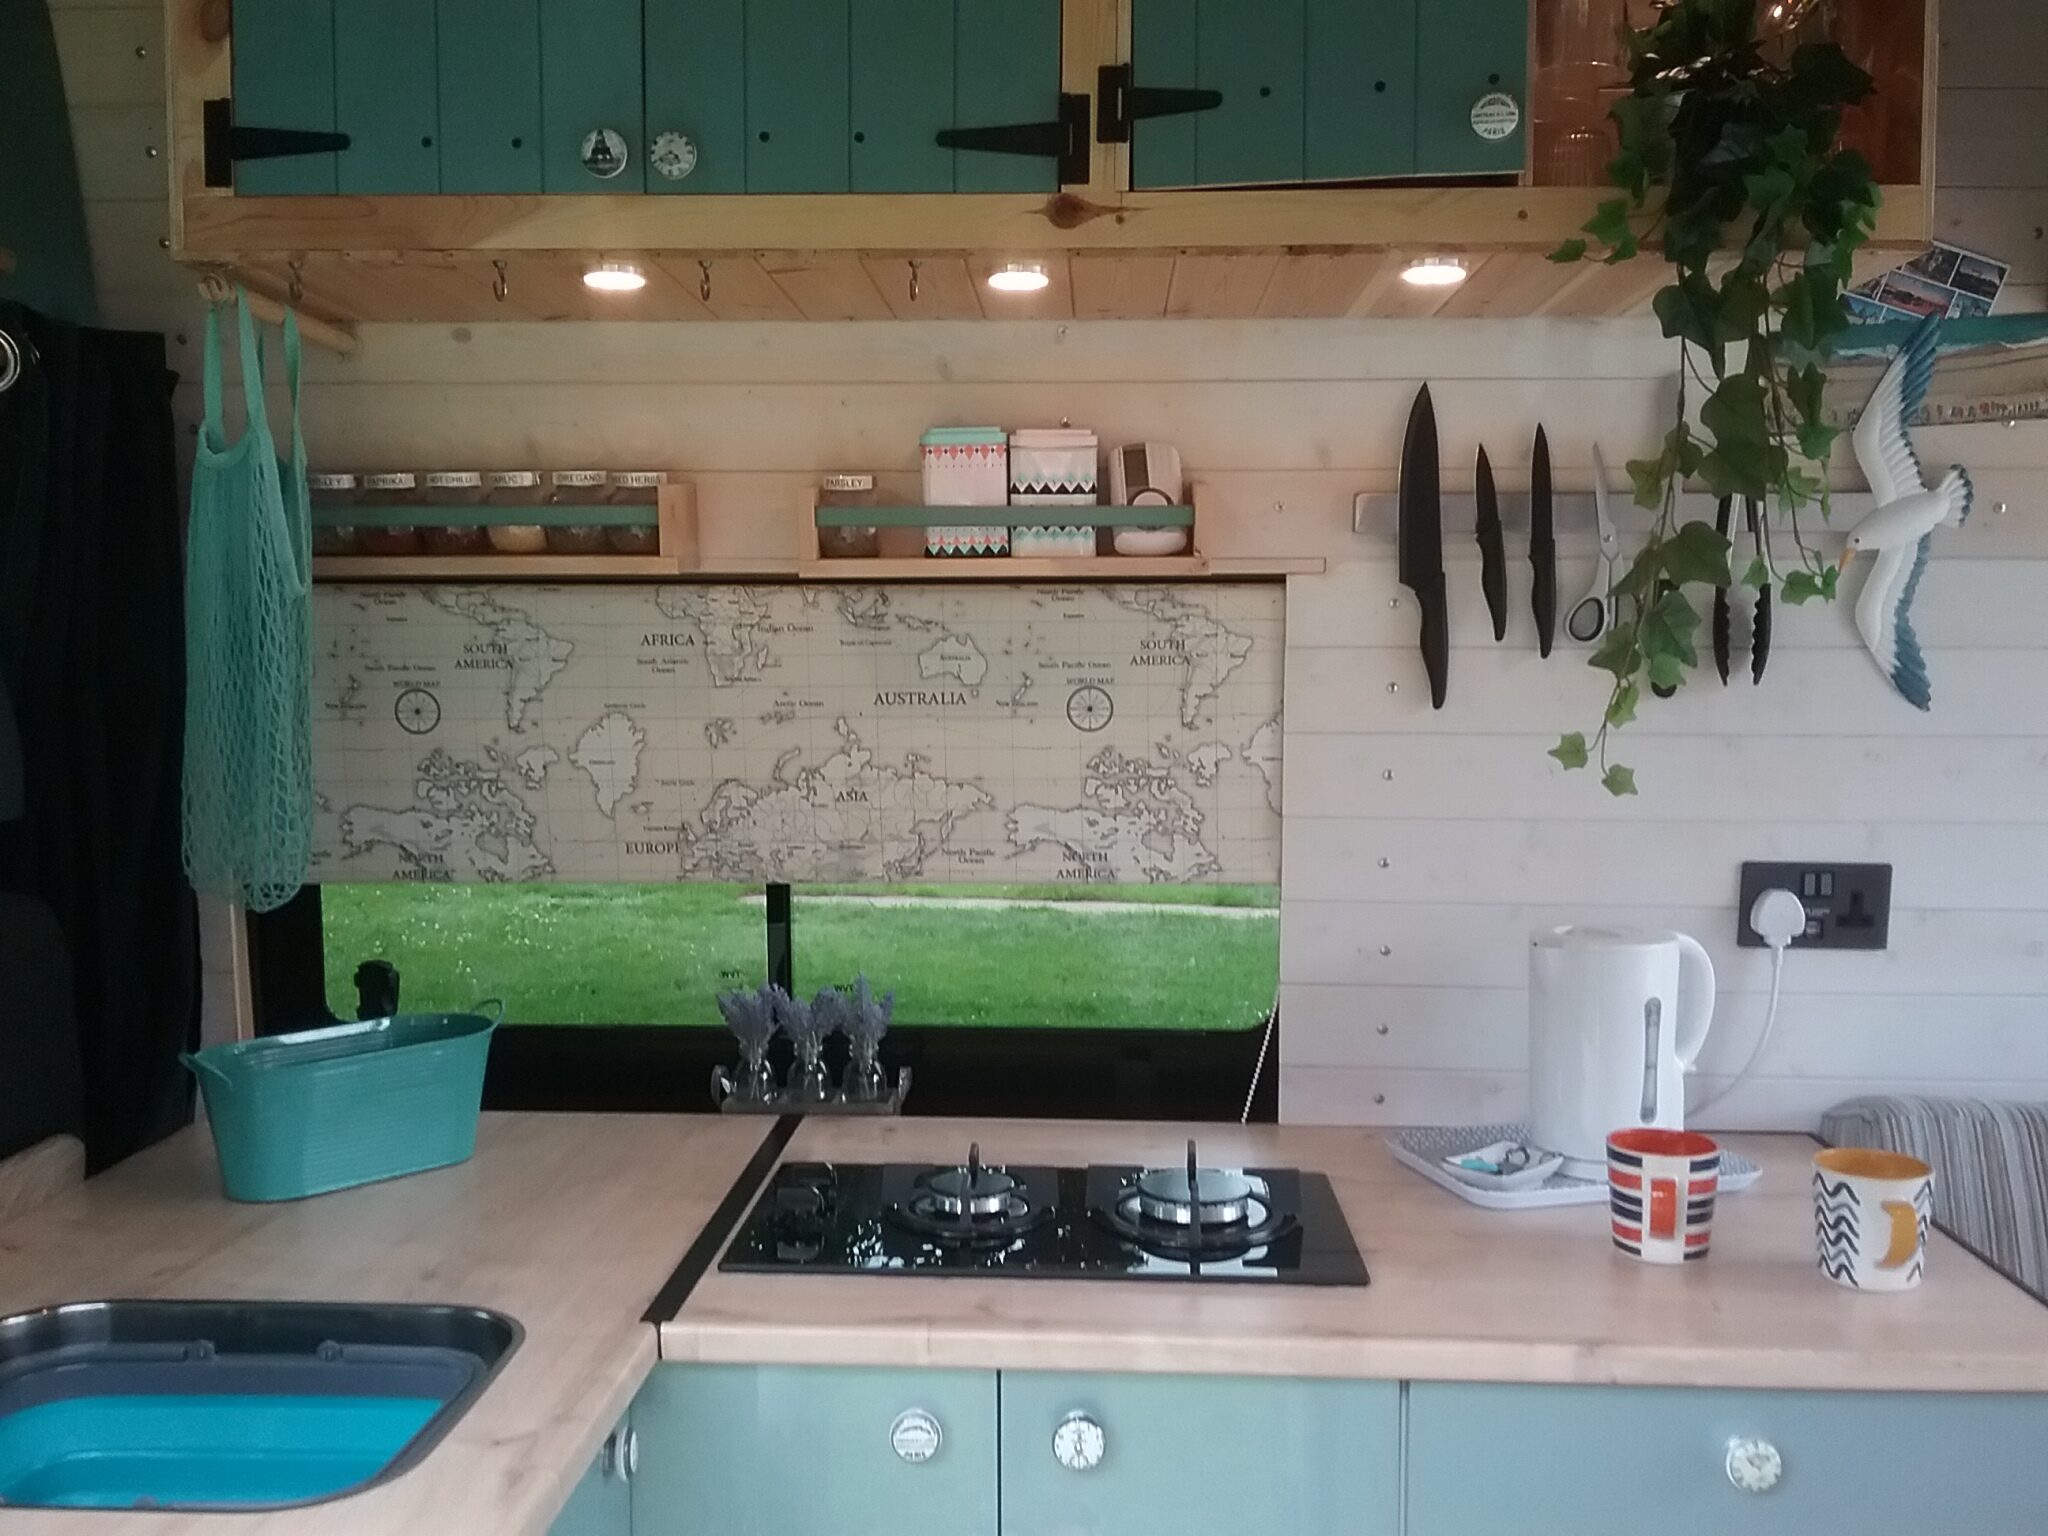 A cozy campervan kitchen features a two-burner stove, a sink, and a wooden countertop. Decor includes a world map window shade, small potted plants, teal and white storage cabinets, mugs, a kettle, and a hanging plant. Under-cabinet lights illuminate the tidy, well-organized space.